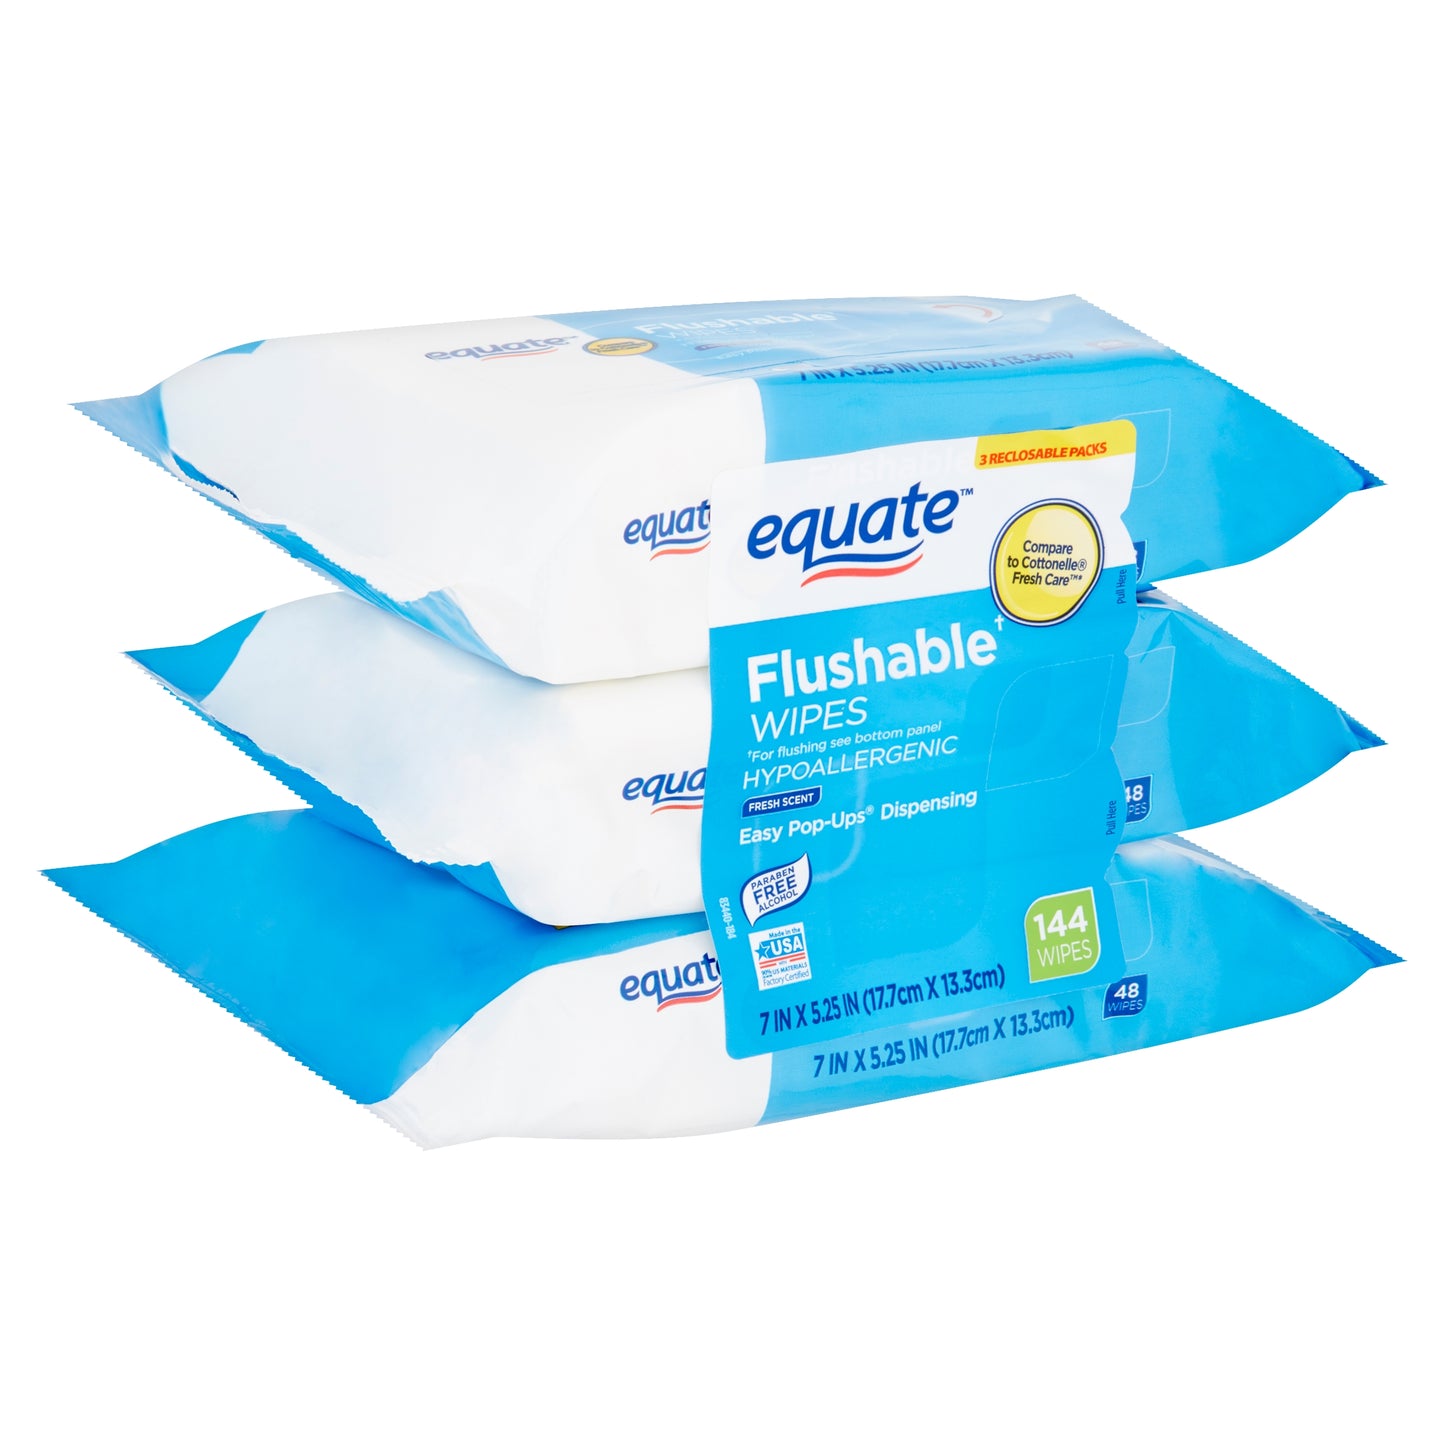 Equate Flushable Wipes, Fresh Scent, 3 Packs of 48 Wipes, 144 Wipes Total